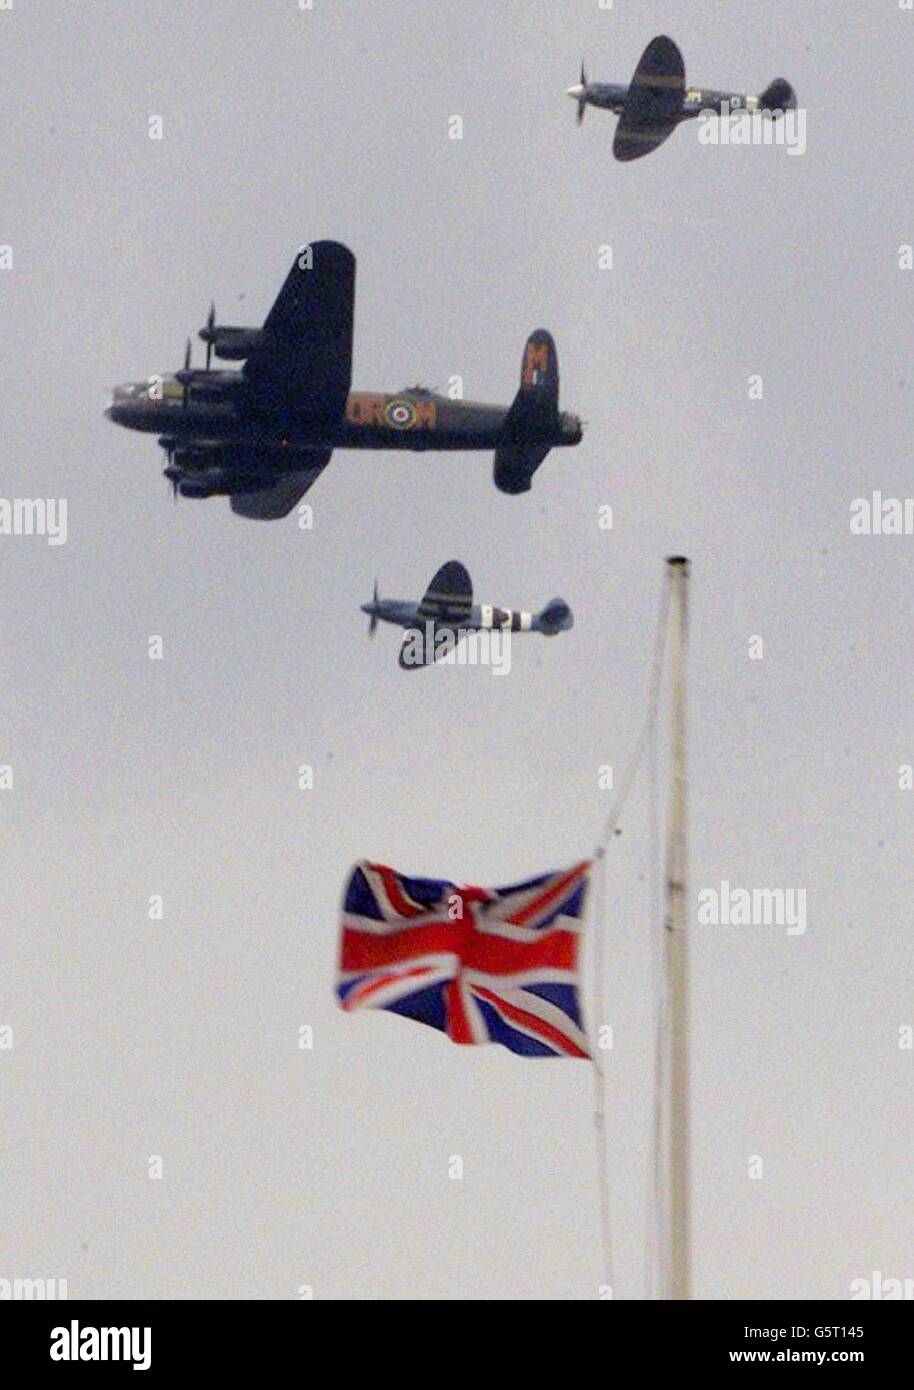 The Royal Air Force's Battle of Britain flight, comprised of a World War II Lancaster bomber, centre, and two Spitfire fighters, passes over the Union flag flying at half-staff on the Treasury building in London, following the funeral of the Queen Mother at Westminster Abbey. Stock Photo